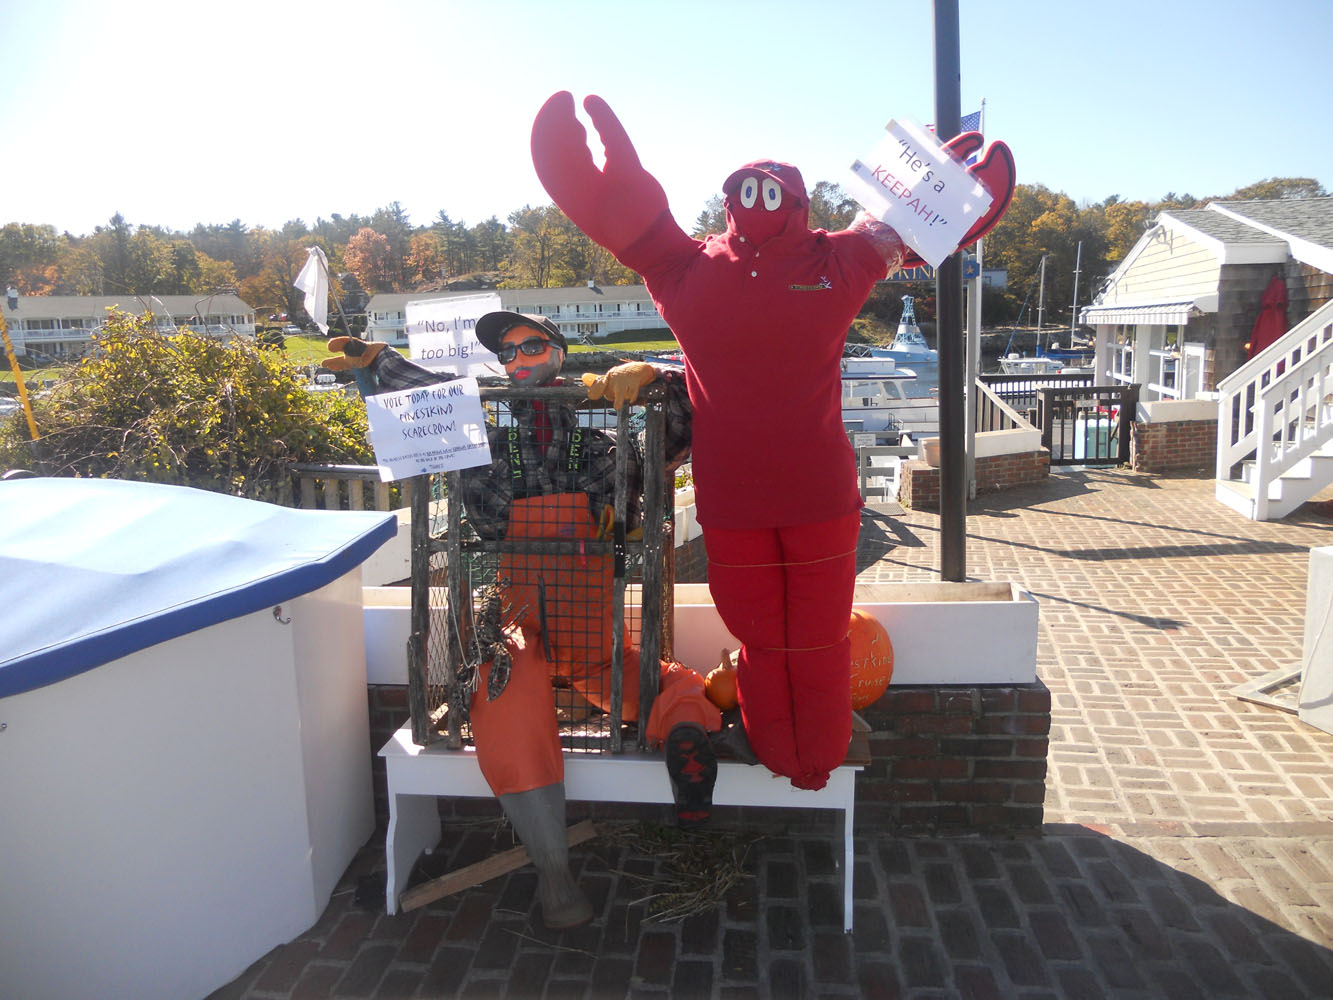 Lobster And A Scarecrow  In A Trap  (user submitted)